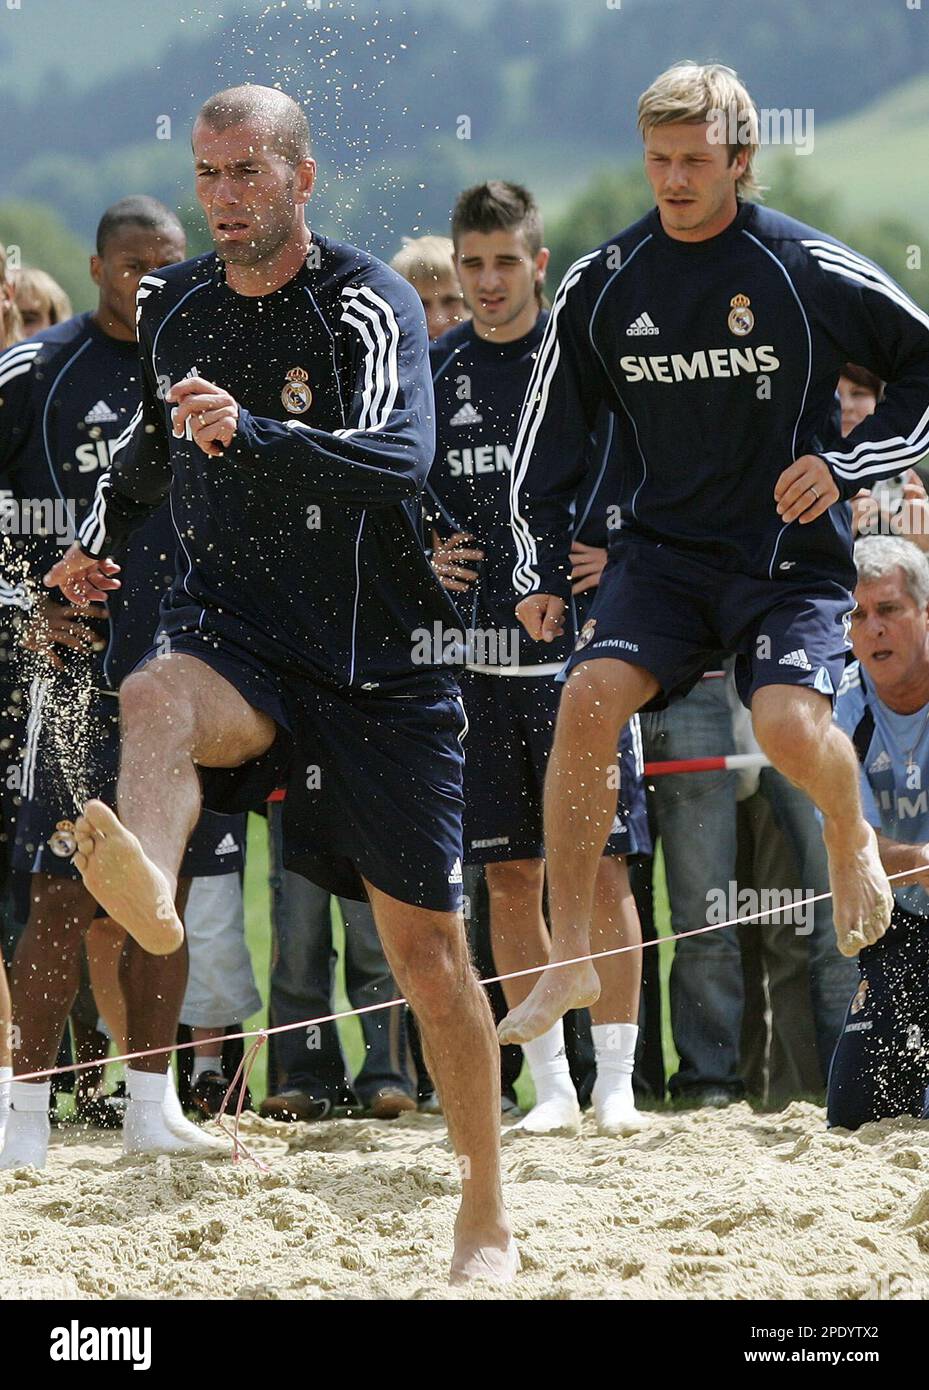 Real Madrid's Zinedine Zidane, front, and David Beckham jump in sand during a Real Madrid pre-season trainingcamp in the Austrian town of Irdning Friday, Aug. 4 2005. (AP Photo/Andreas Schaad) Stock Photo